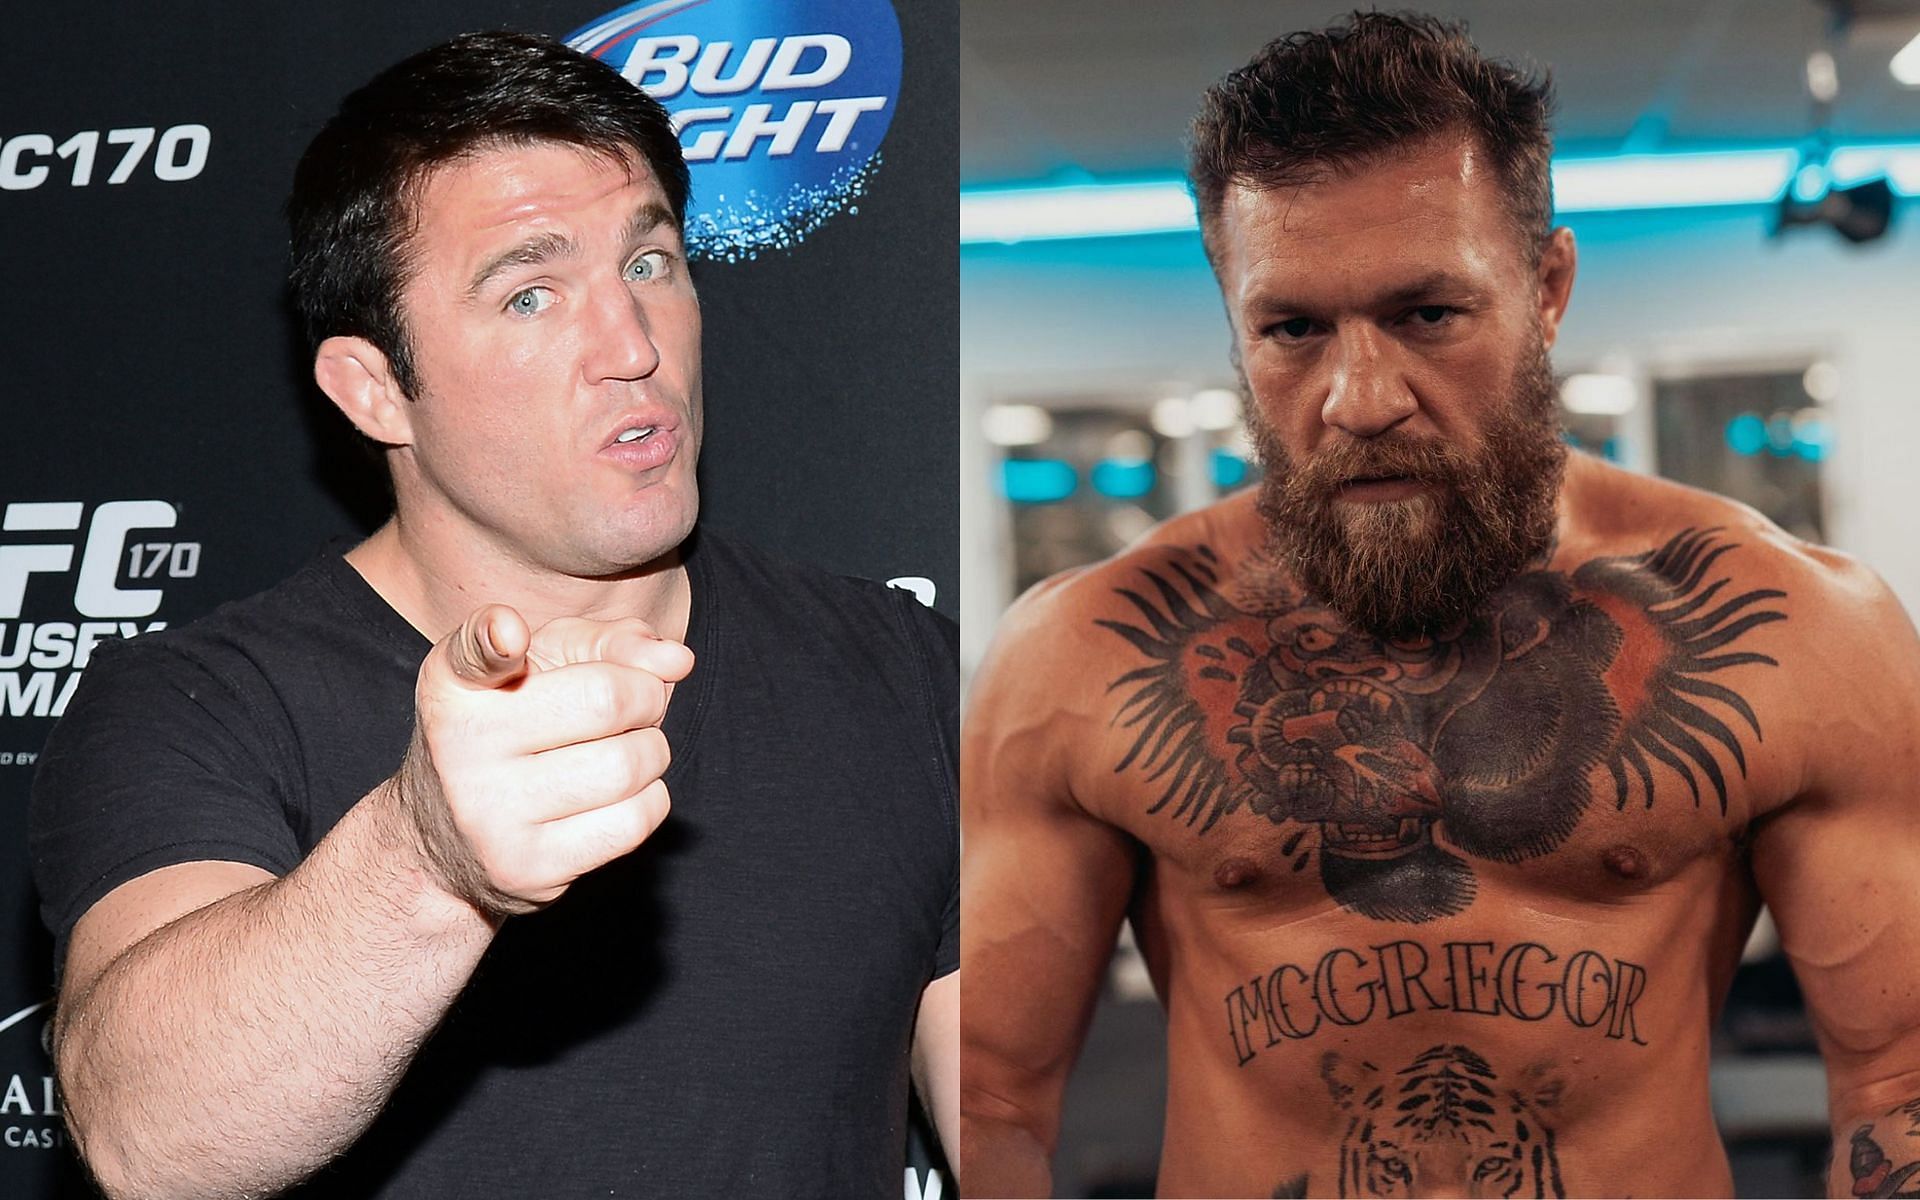 Chael Sonnen (L) and Conor McGregor (R) (via @thenotoriousmma on Instagram)